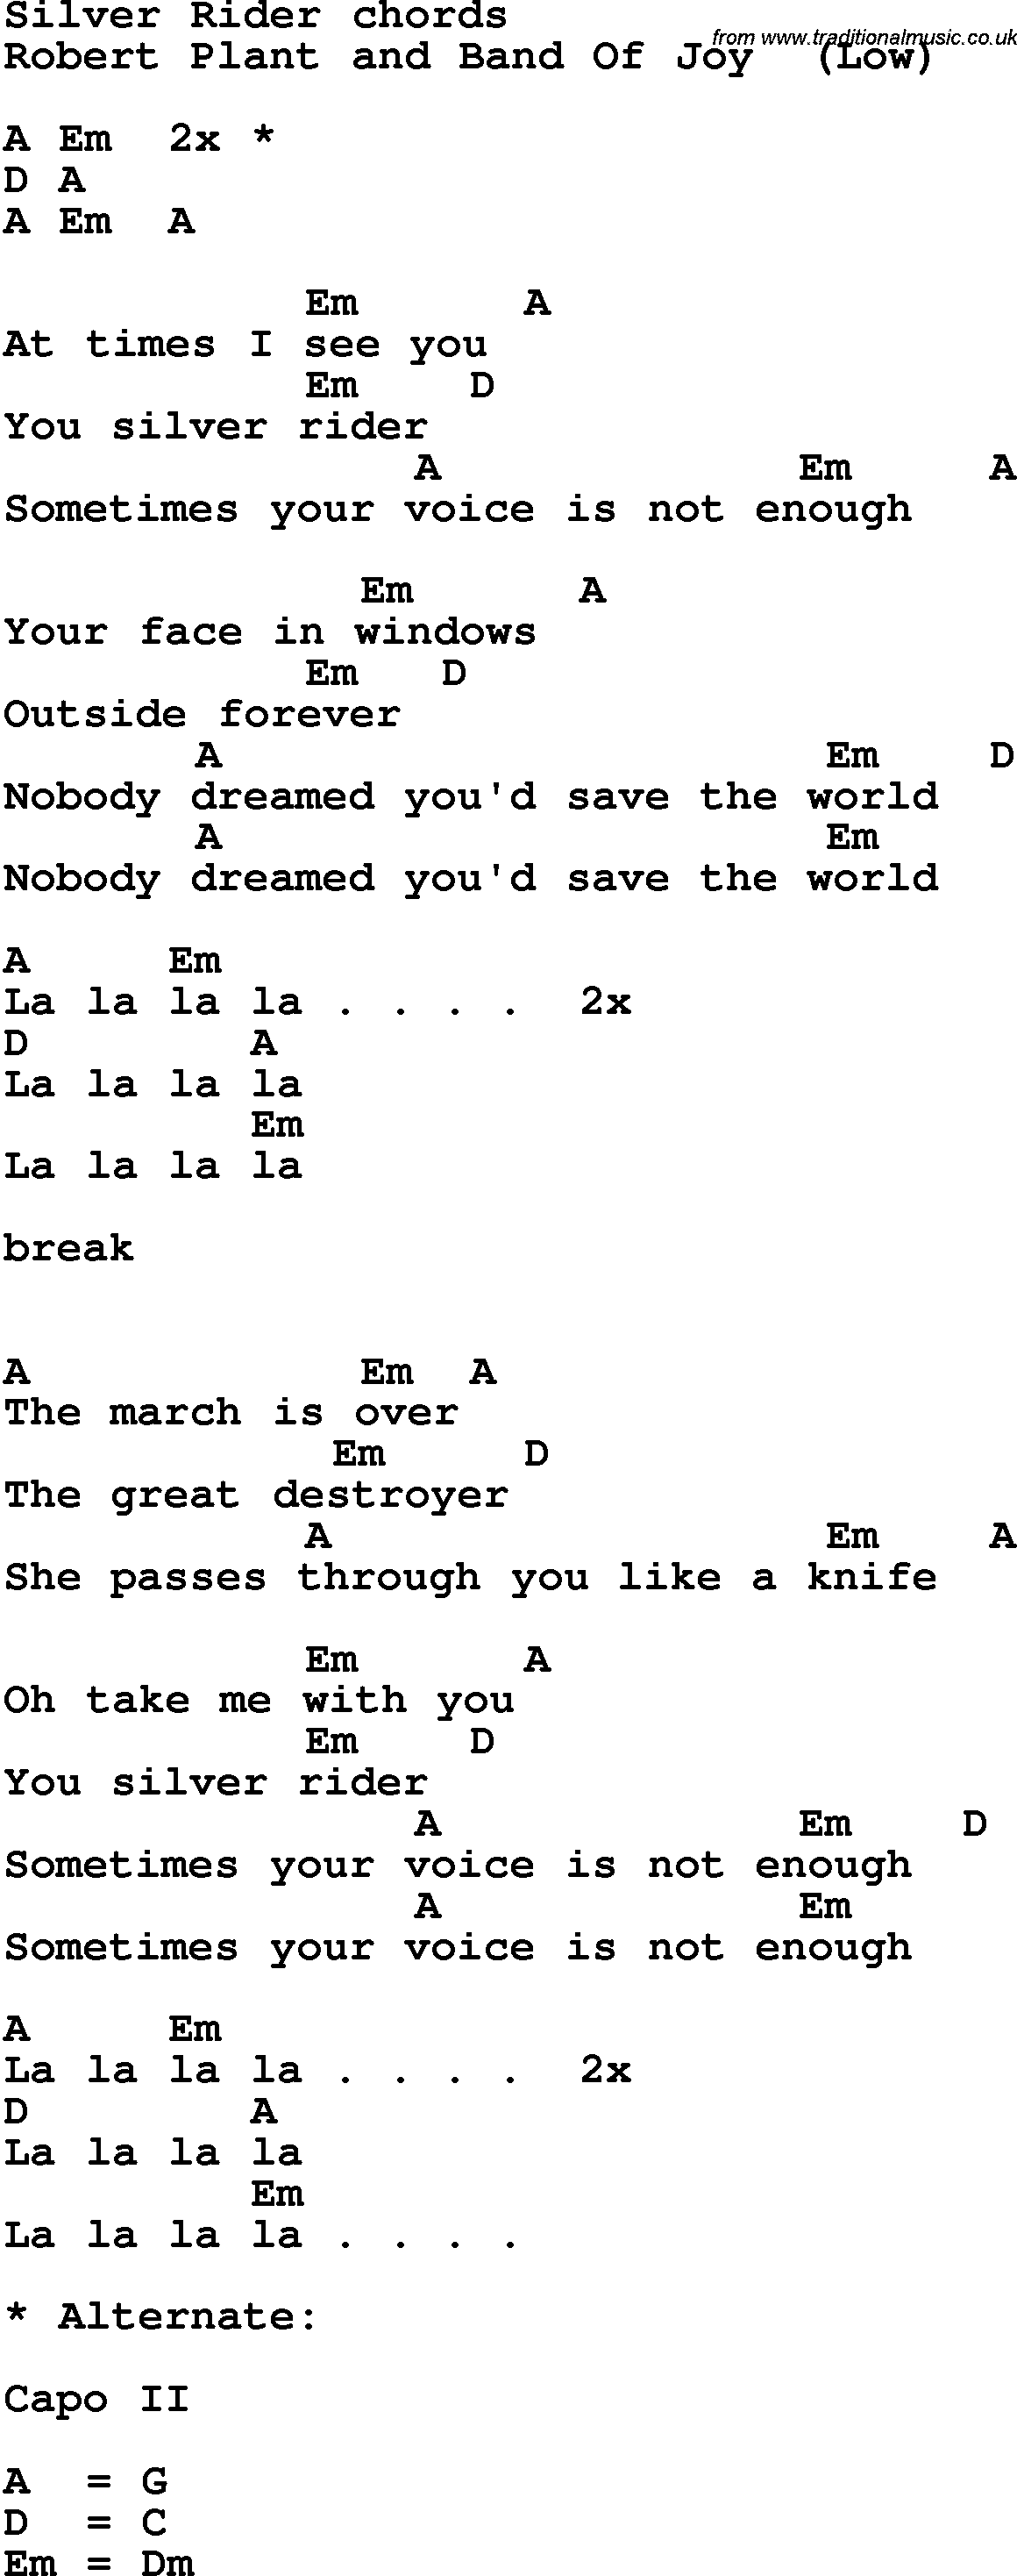 Song Lyrics with guitar chords for Silver Rider - Robert Plant And Band Of Joy